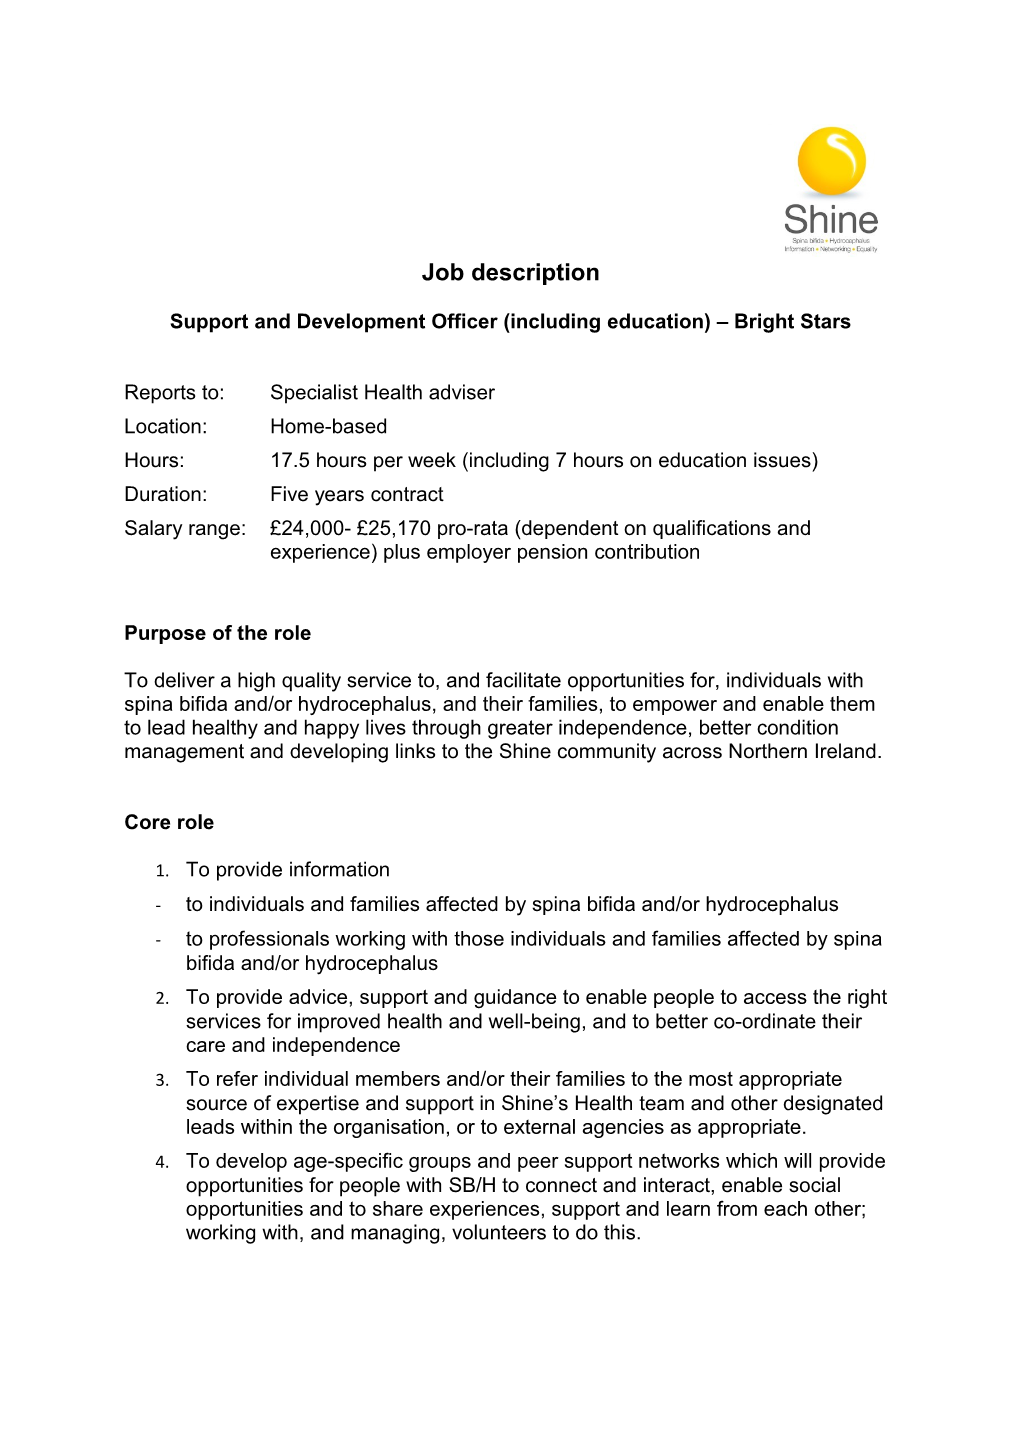 Support and Development Officer (Including Education) Bright Stars